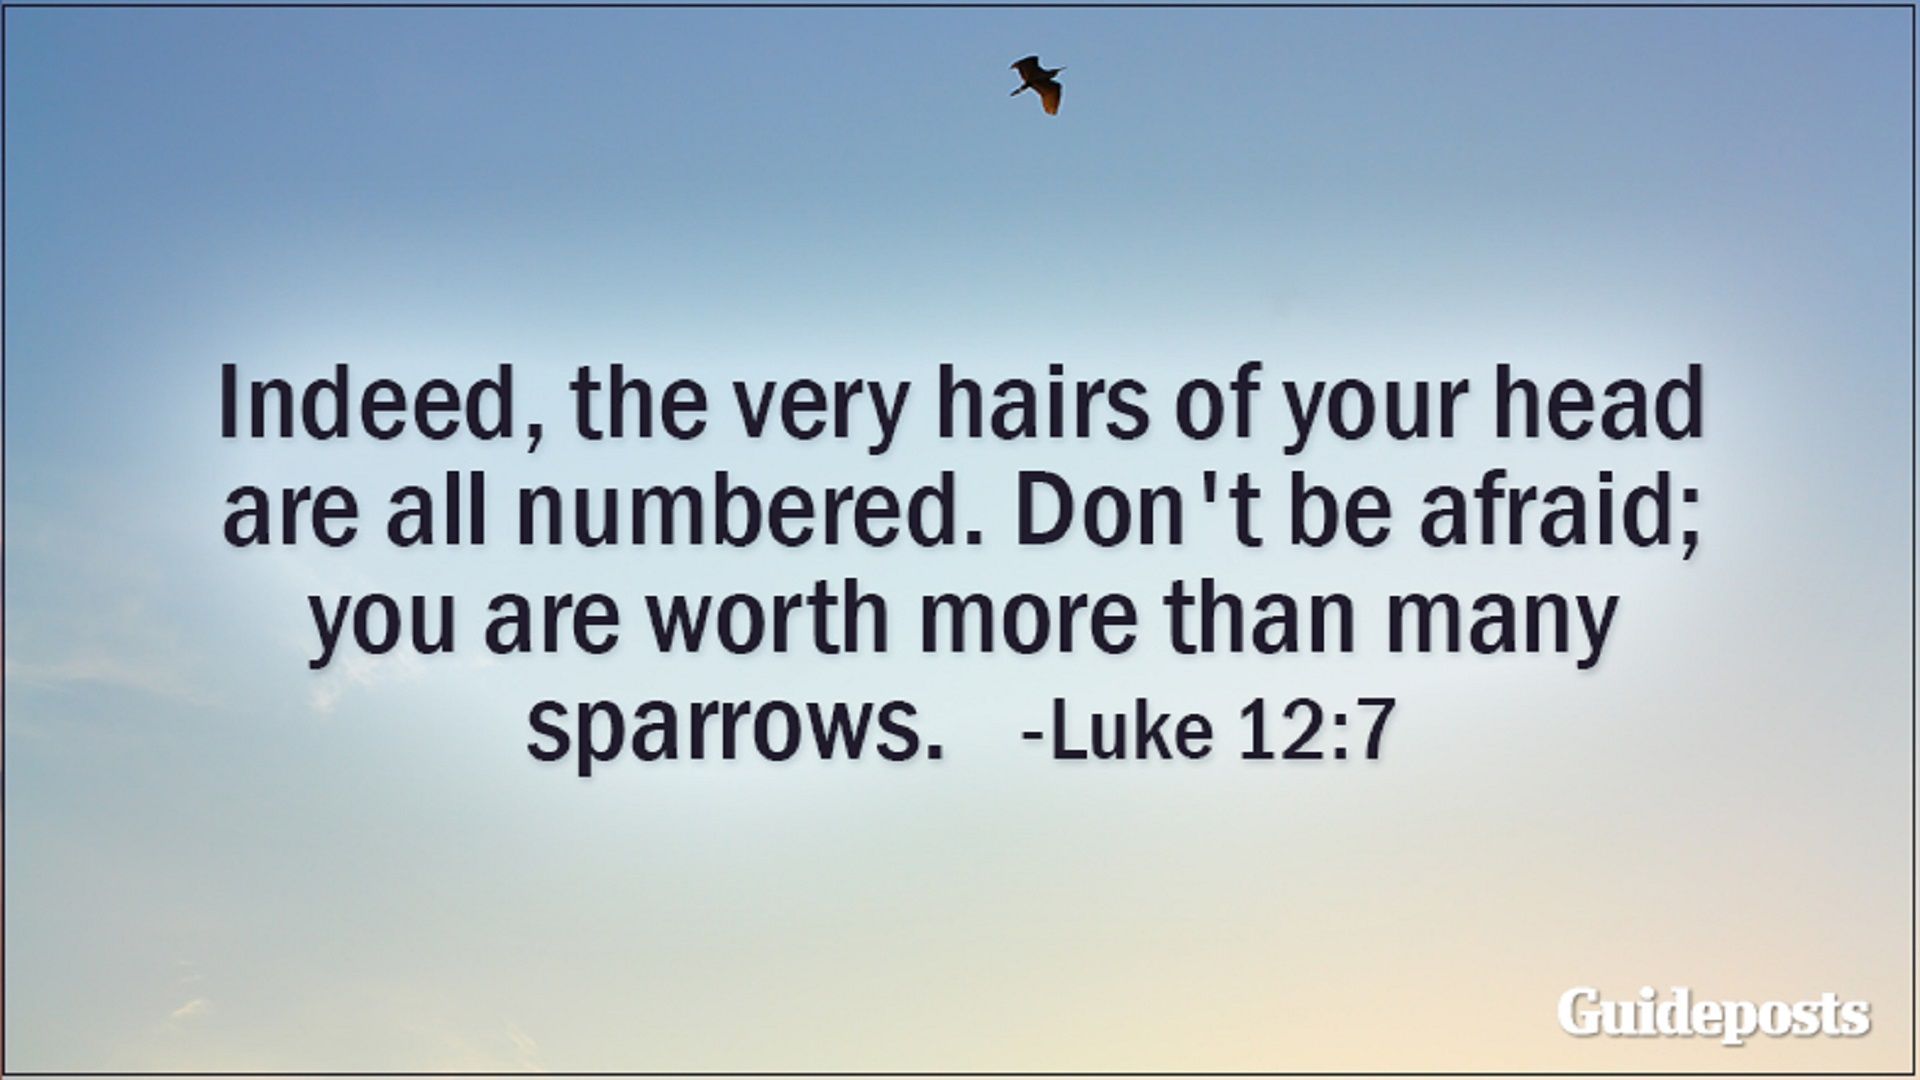 Indeed, the very hairs of your head are all numbered. Don't be afraid; you are worth more than many sparrows. Luke 12:7